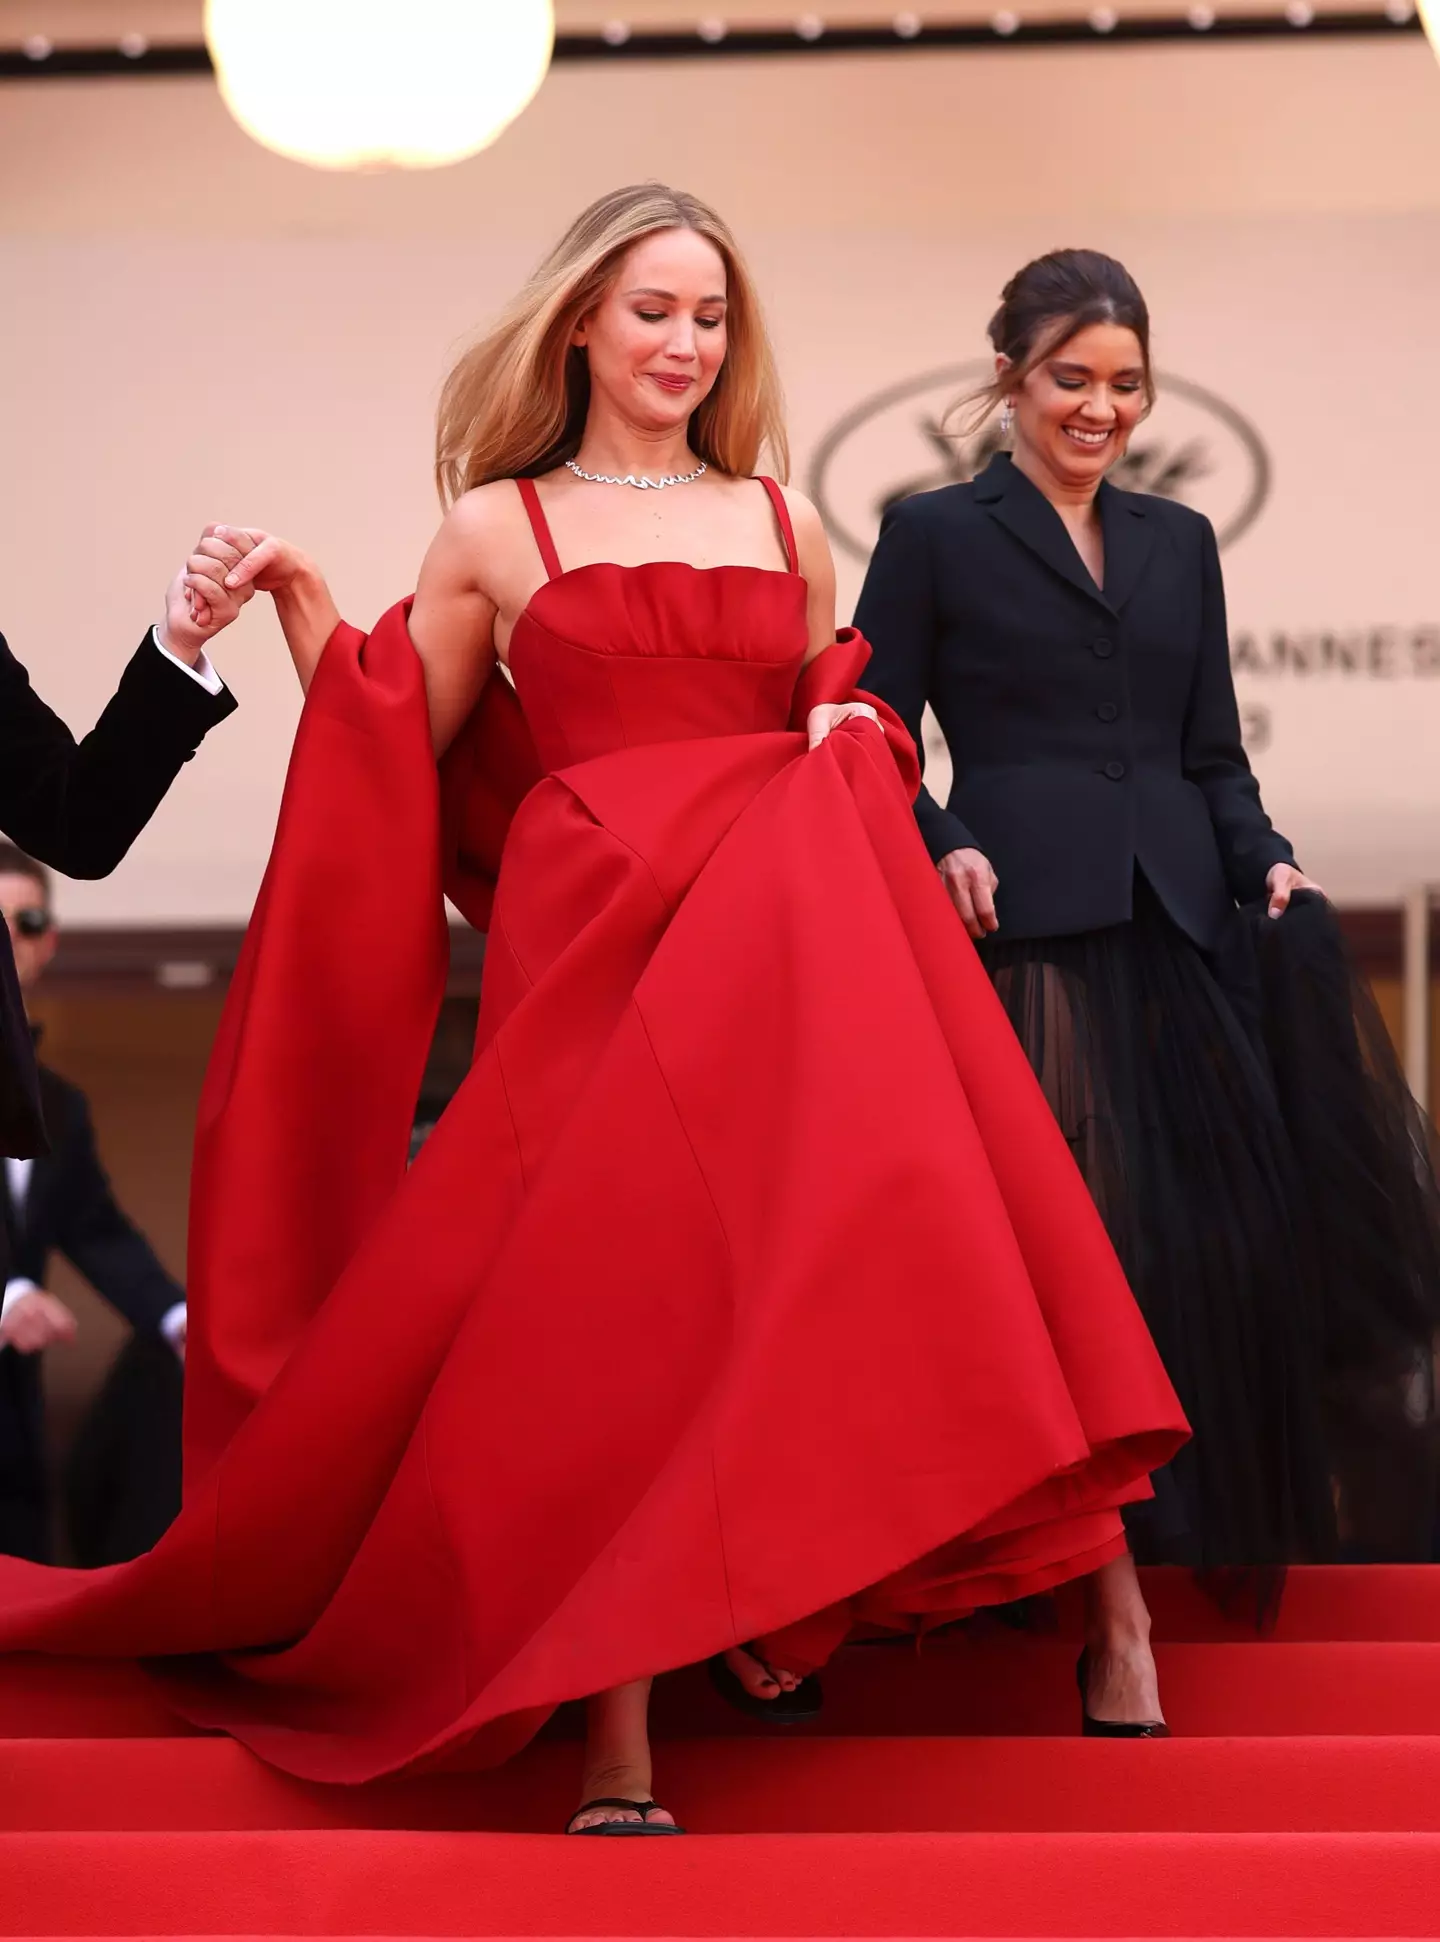 Lawrence paired her Christian Dior gown with... flip flops.